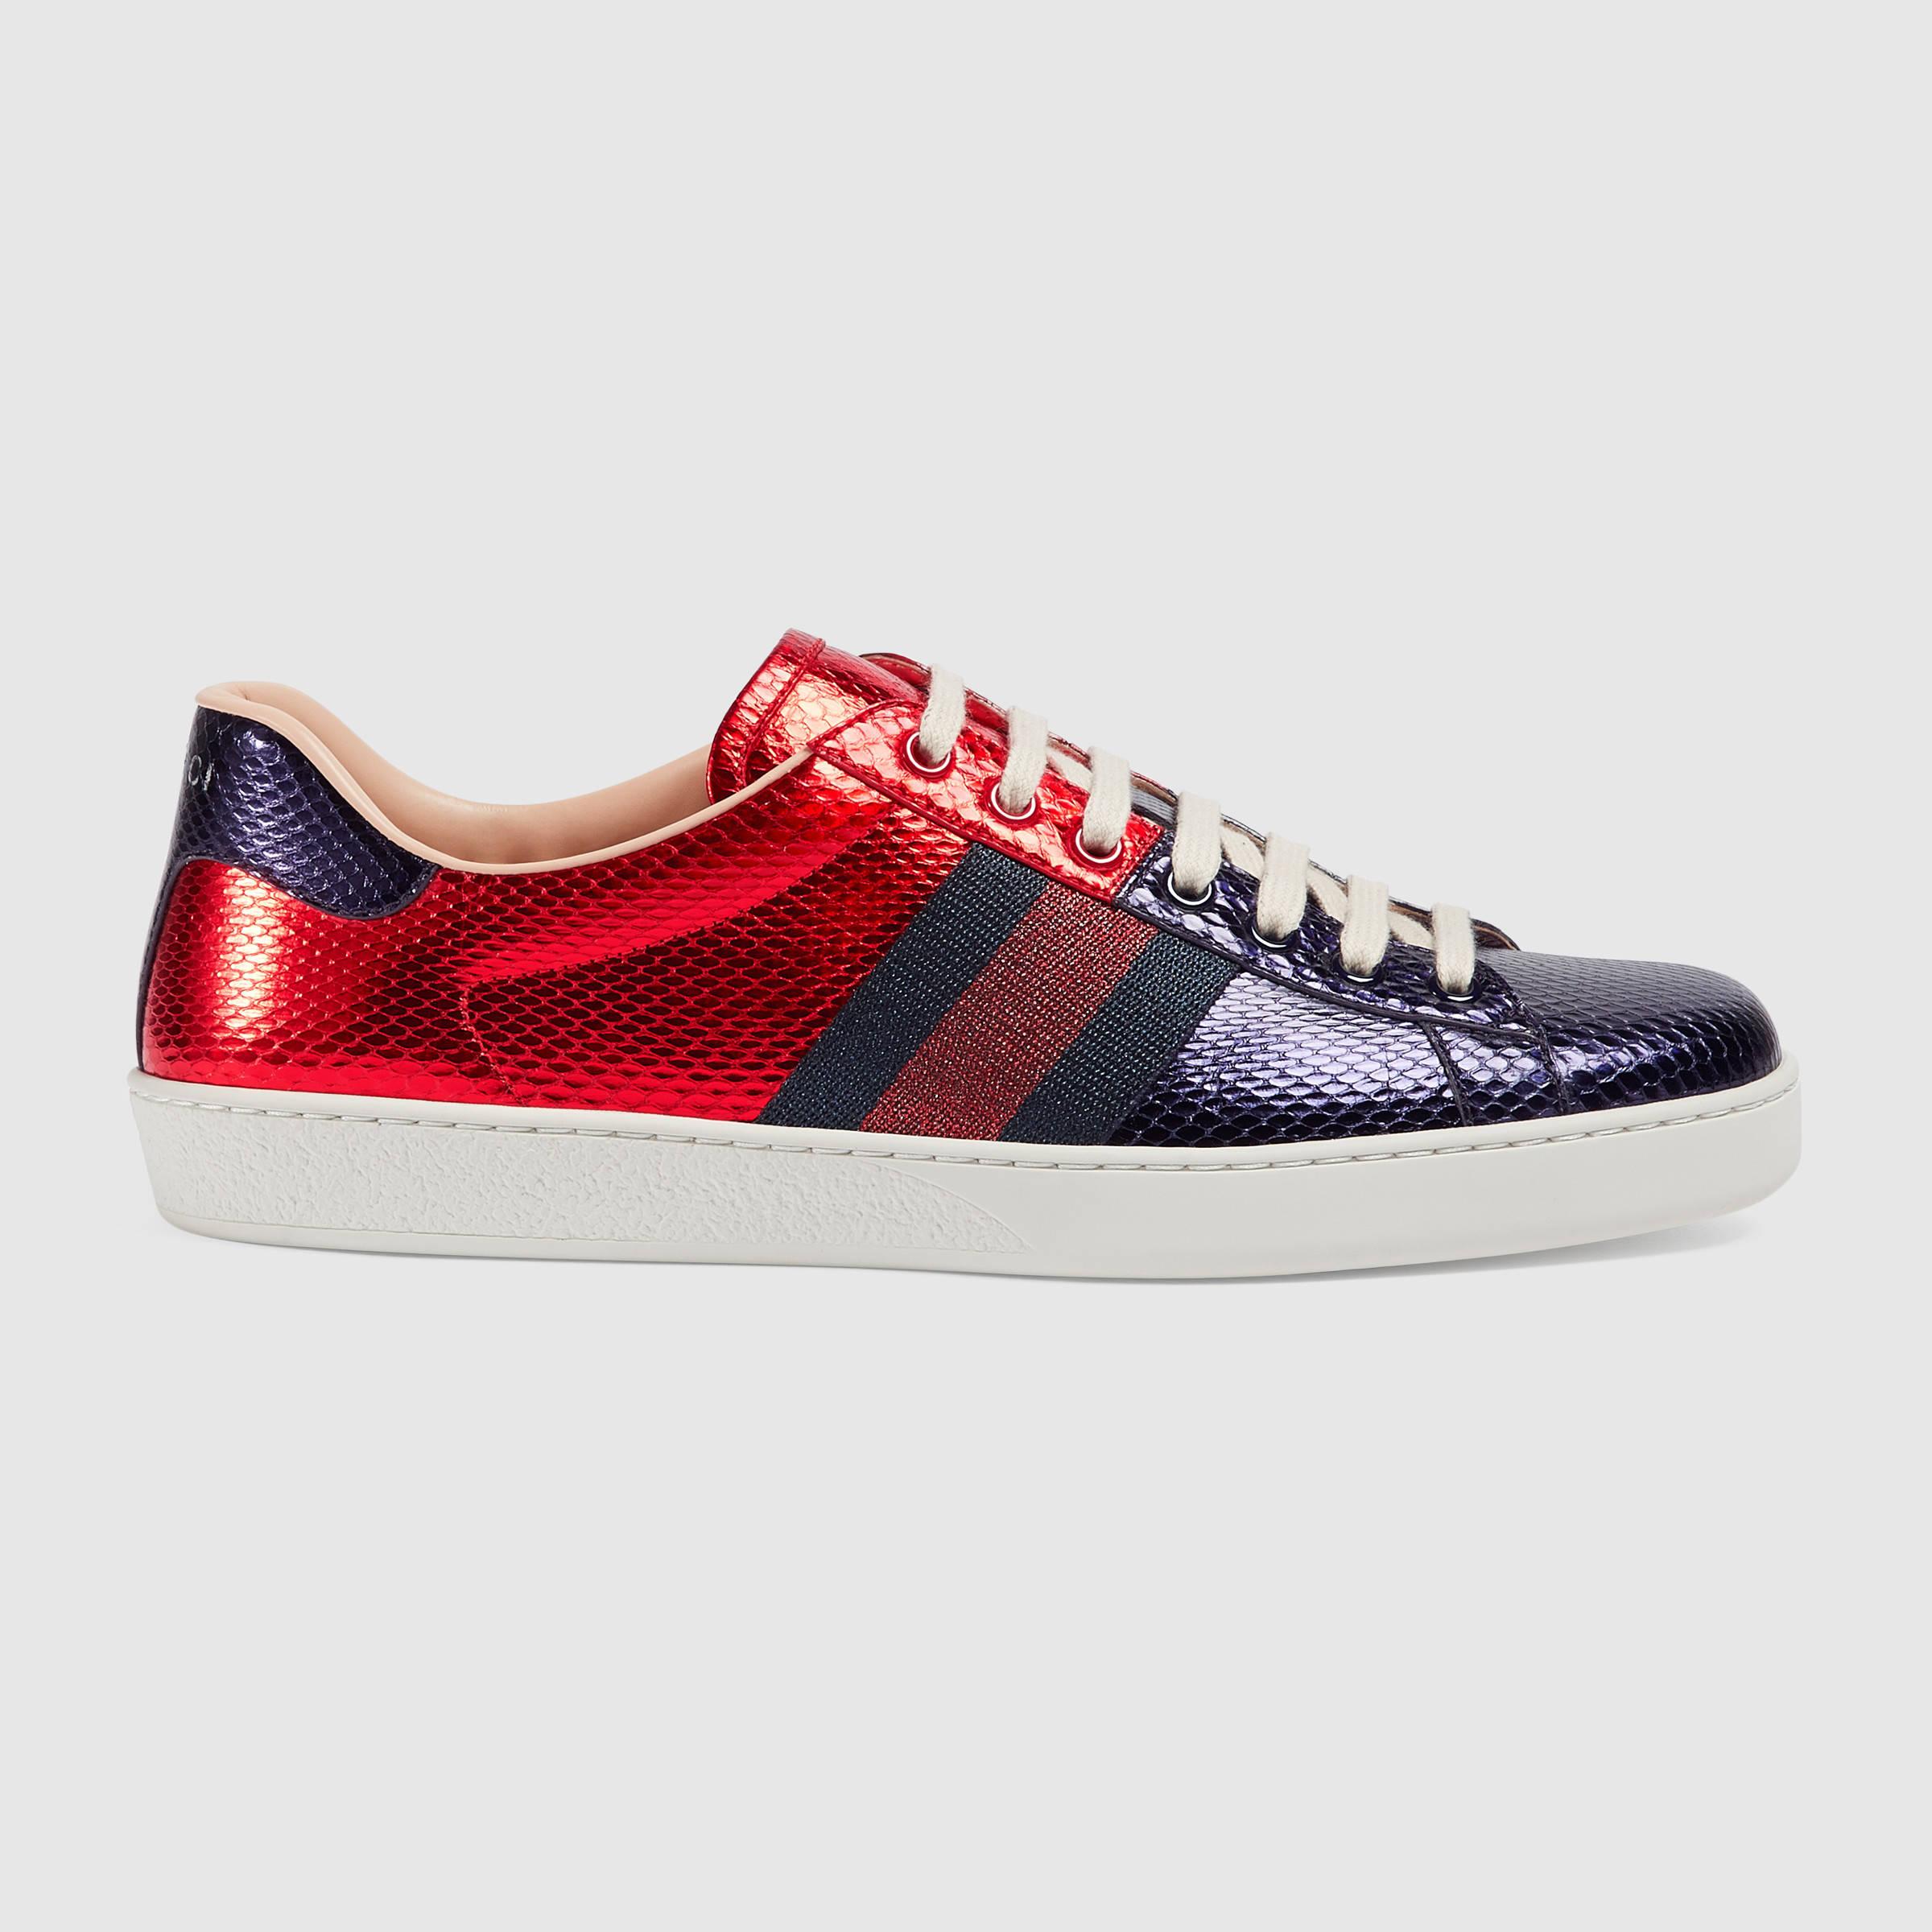 gucci red white blue shoes